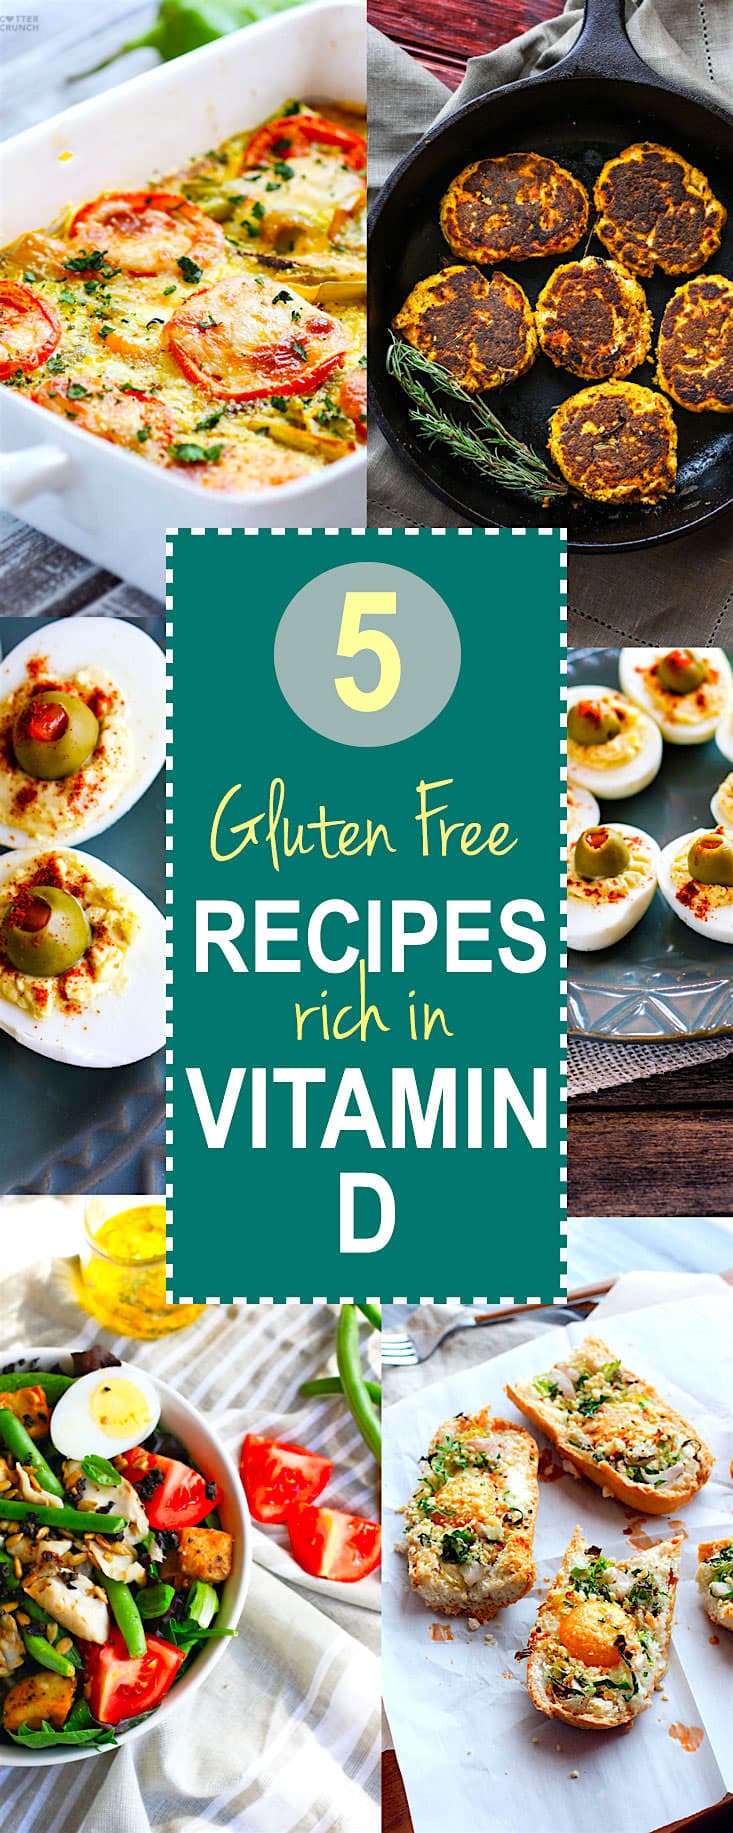 5 Gluten Free Recipes with Eggs to Boost your Vitamin D! Stay healthy this year with these nourishing gluten free Vitamin D rich recipes. Easy to make, healthy, and family approved!